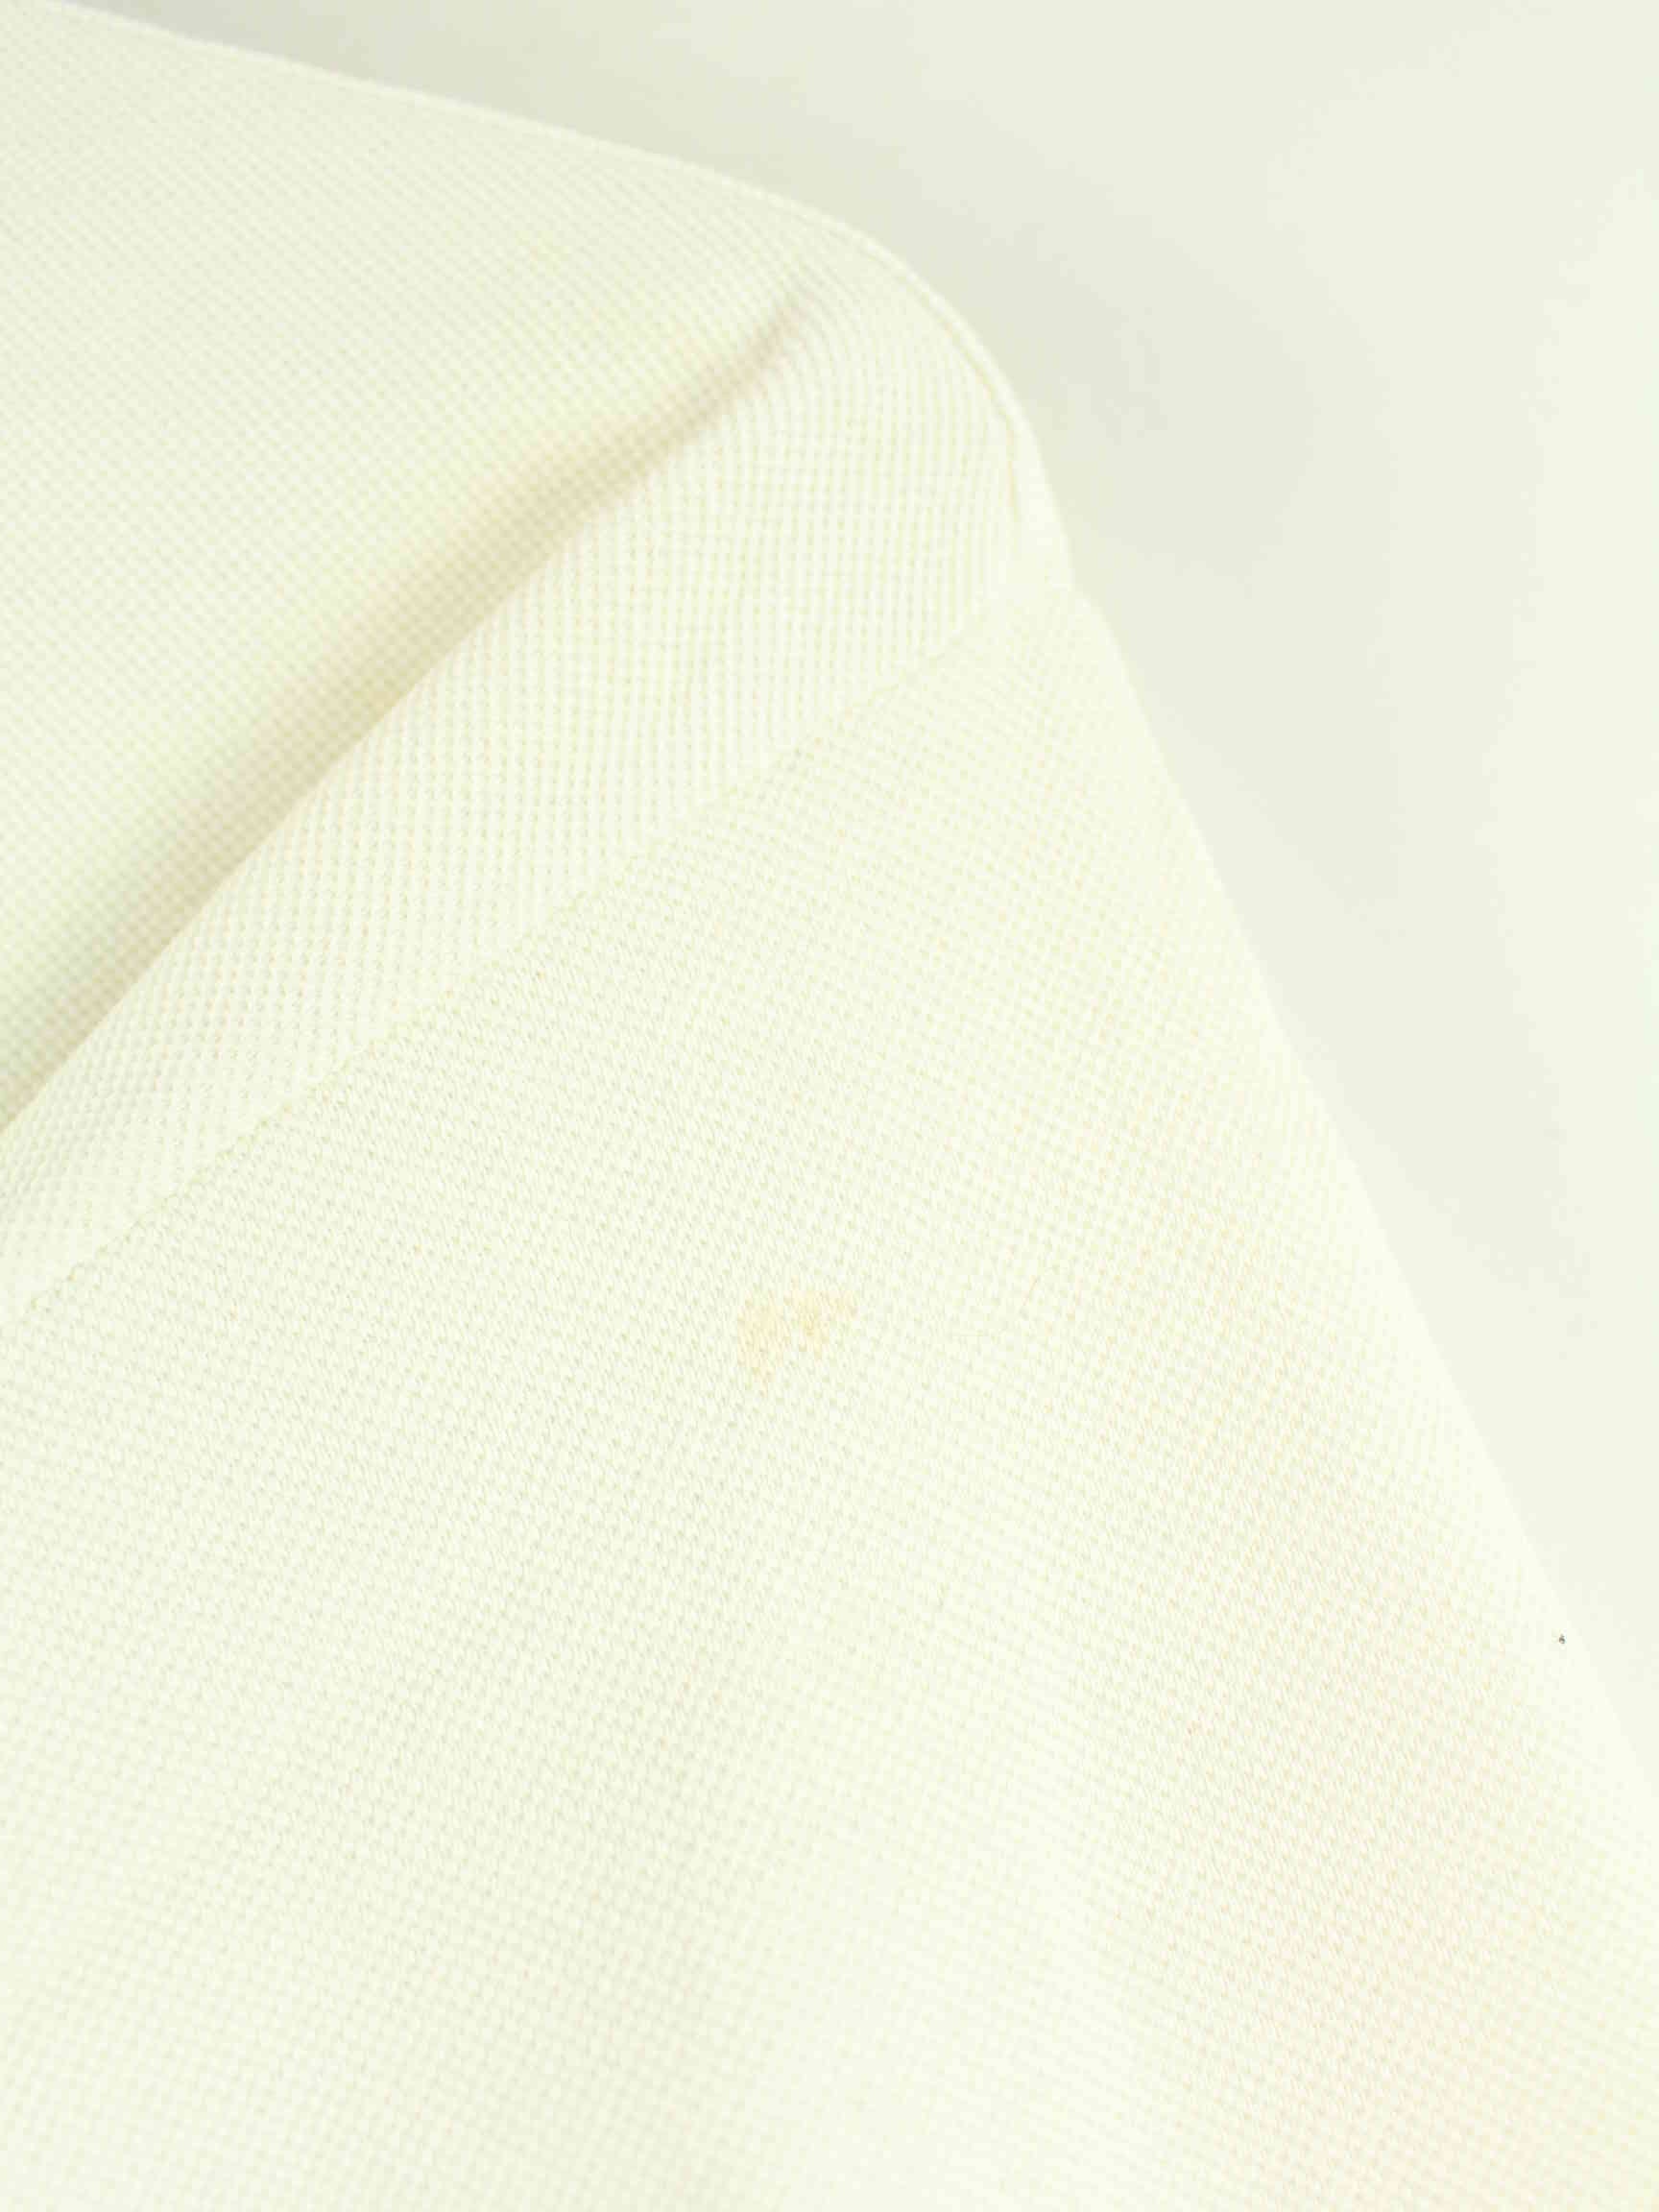 Lacoste 90s Vintage Polo Sweater Beige M (detail image 3)